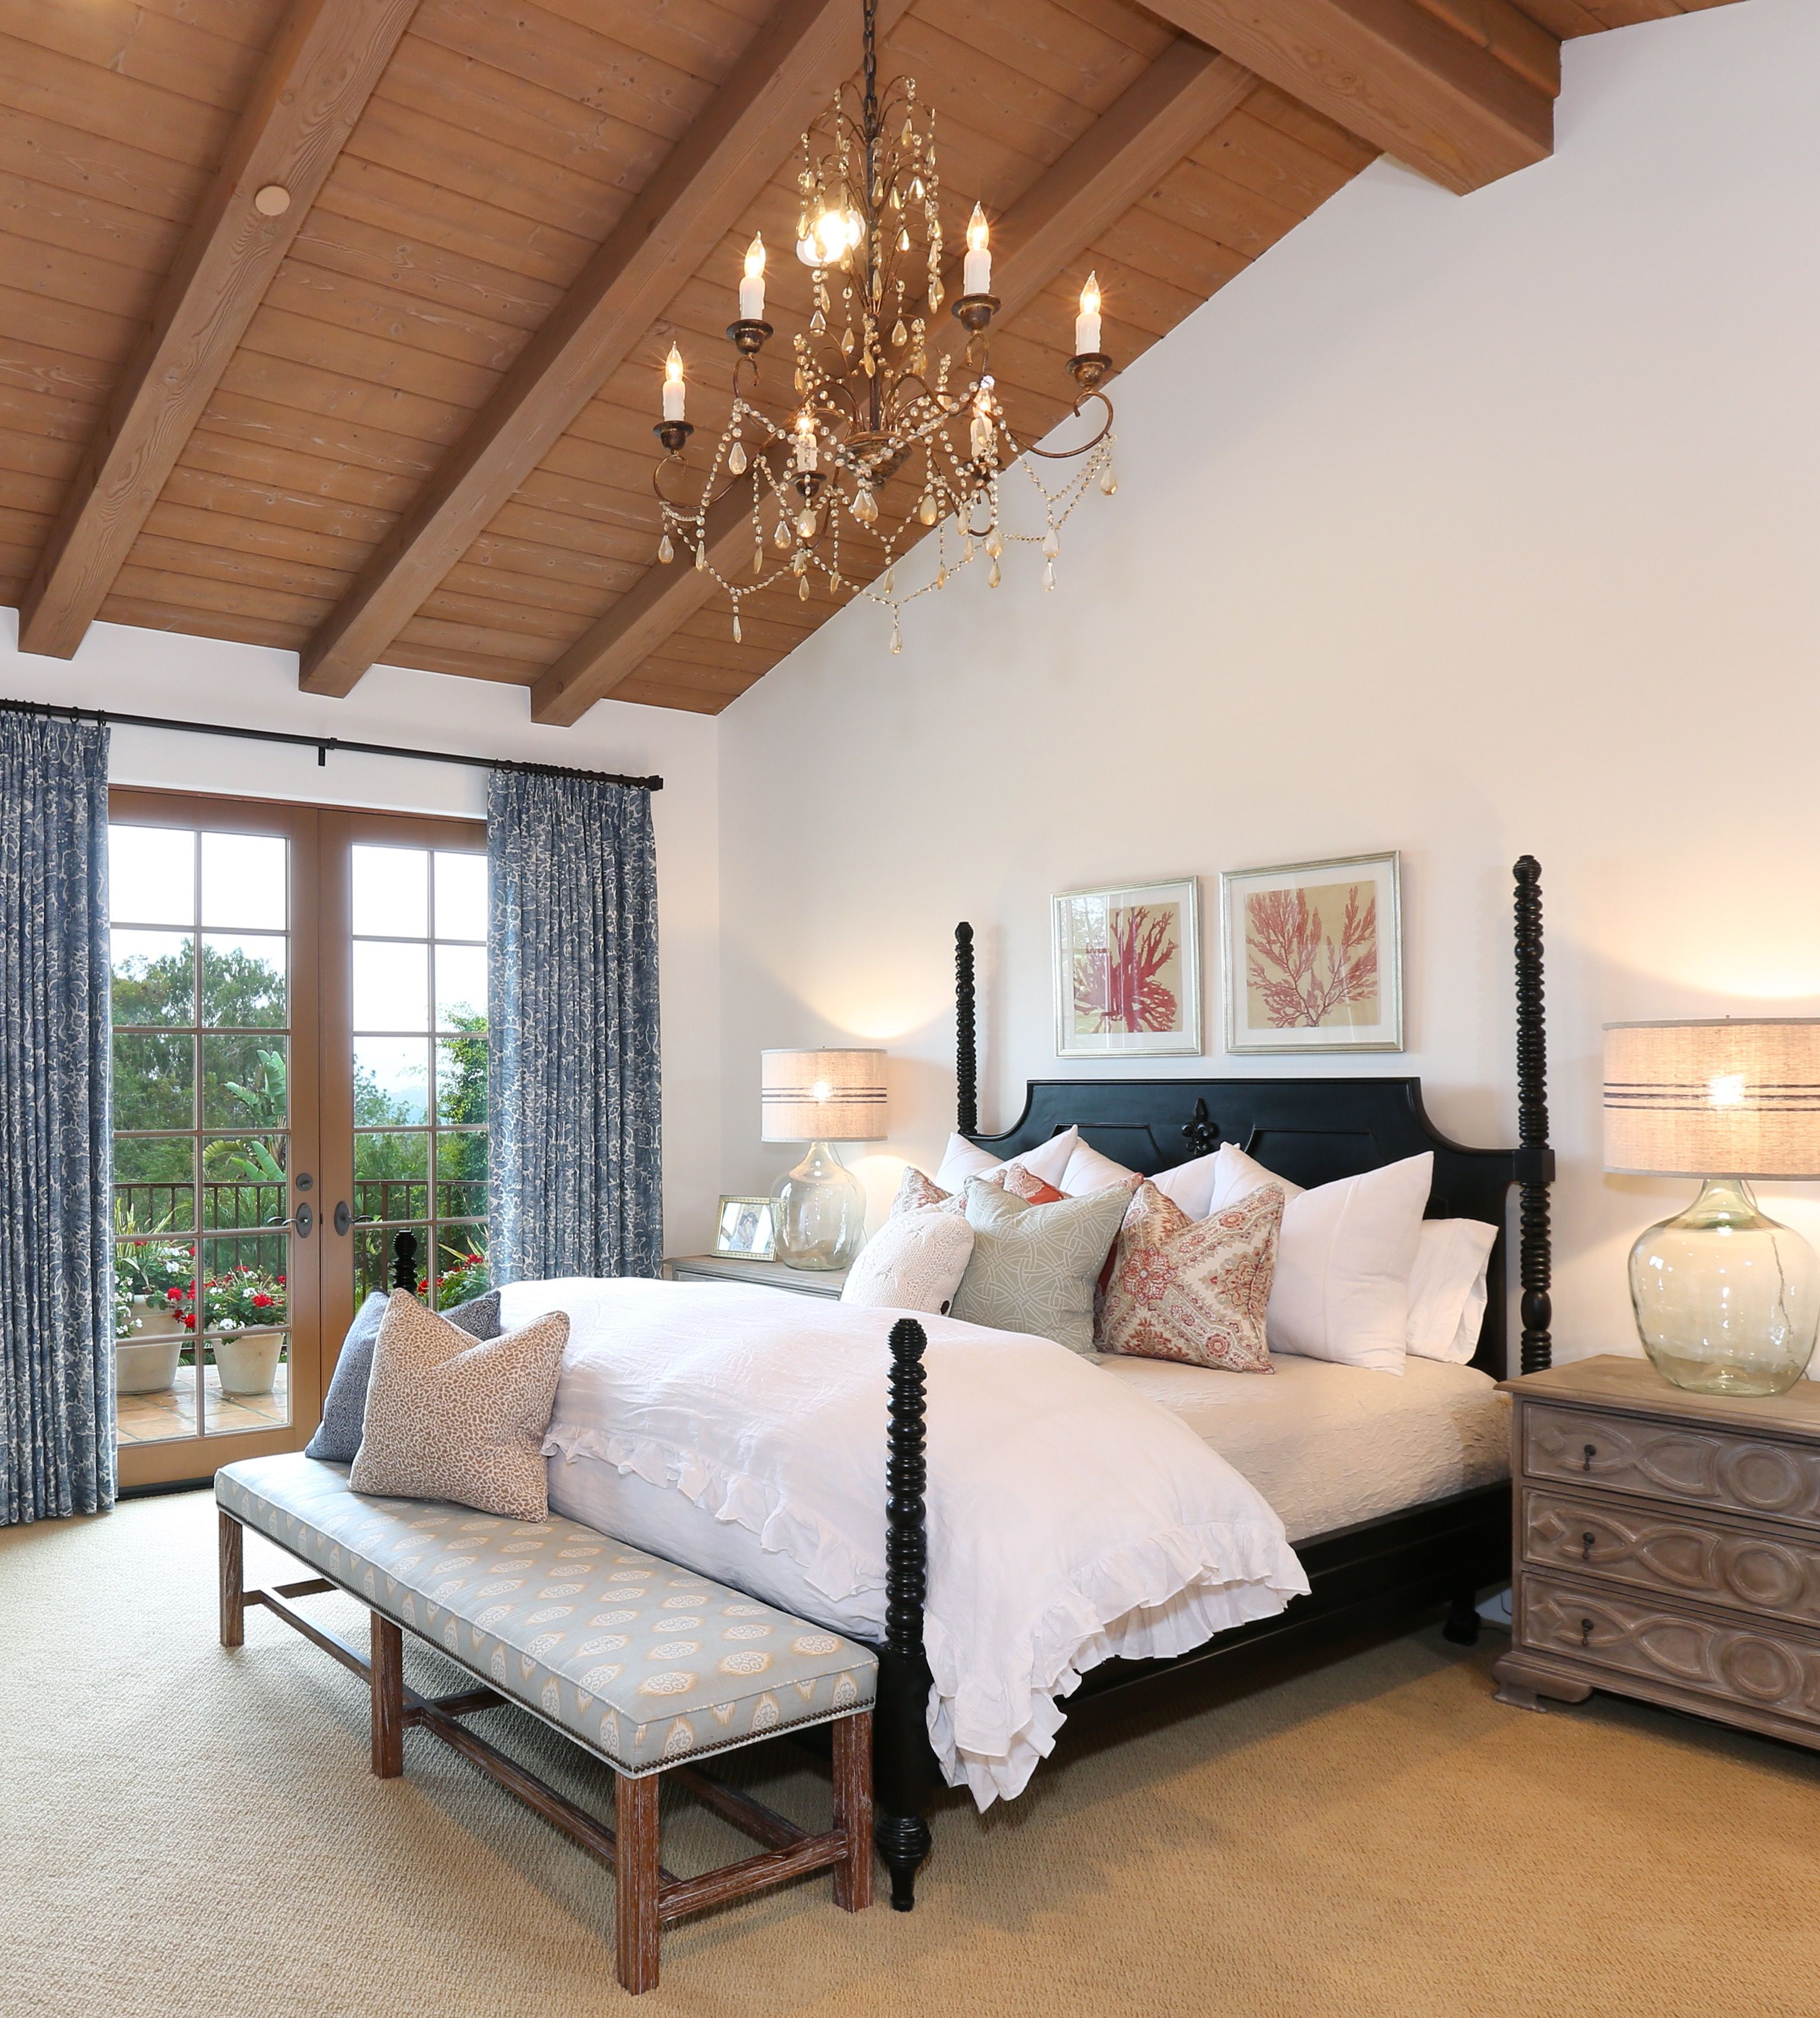 Modern Italian Bedroom With Chandelier And Wood Ceiling (View 1 of 12)